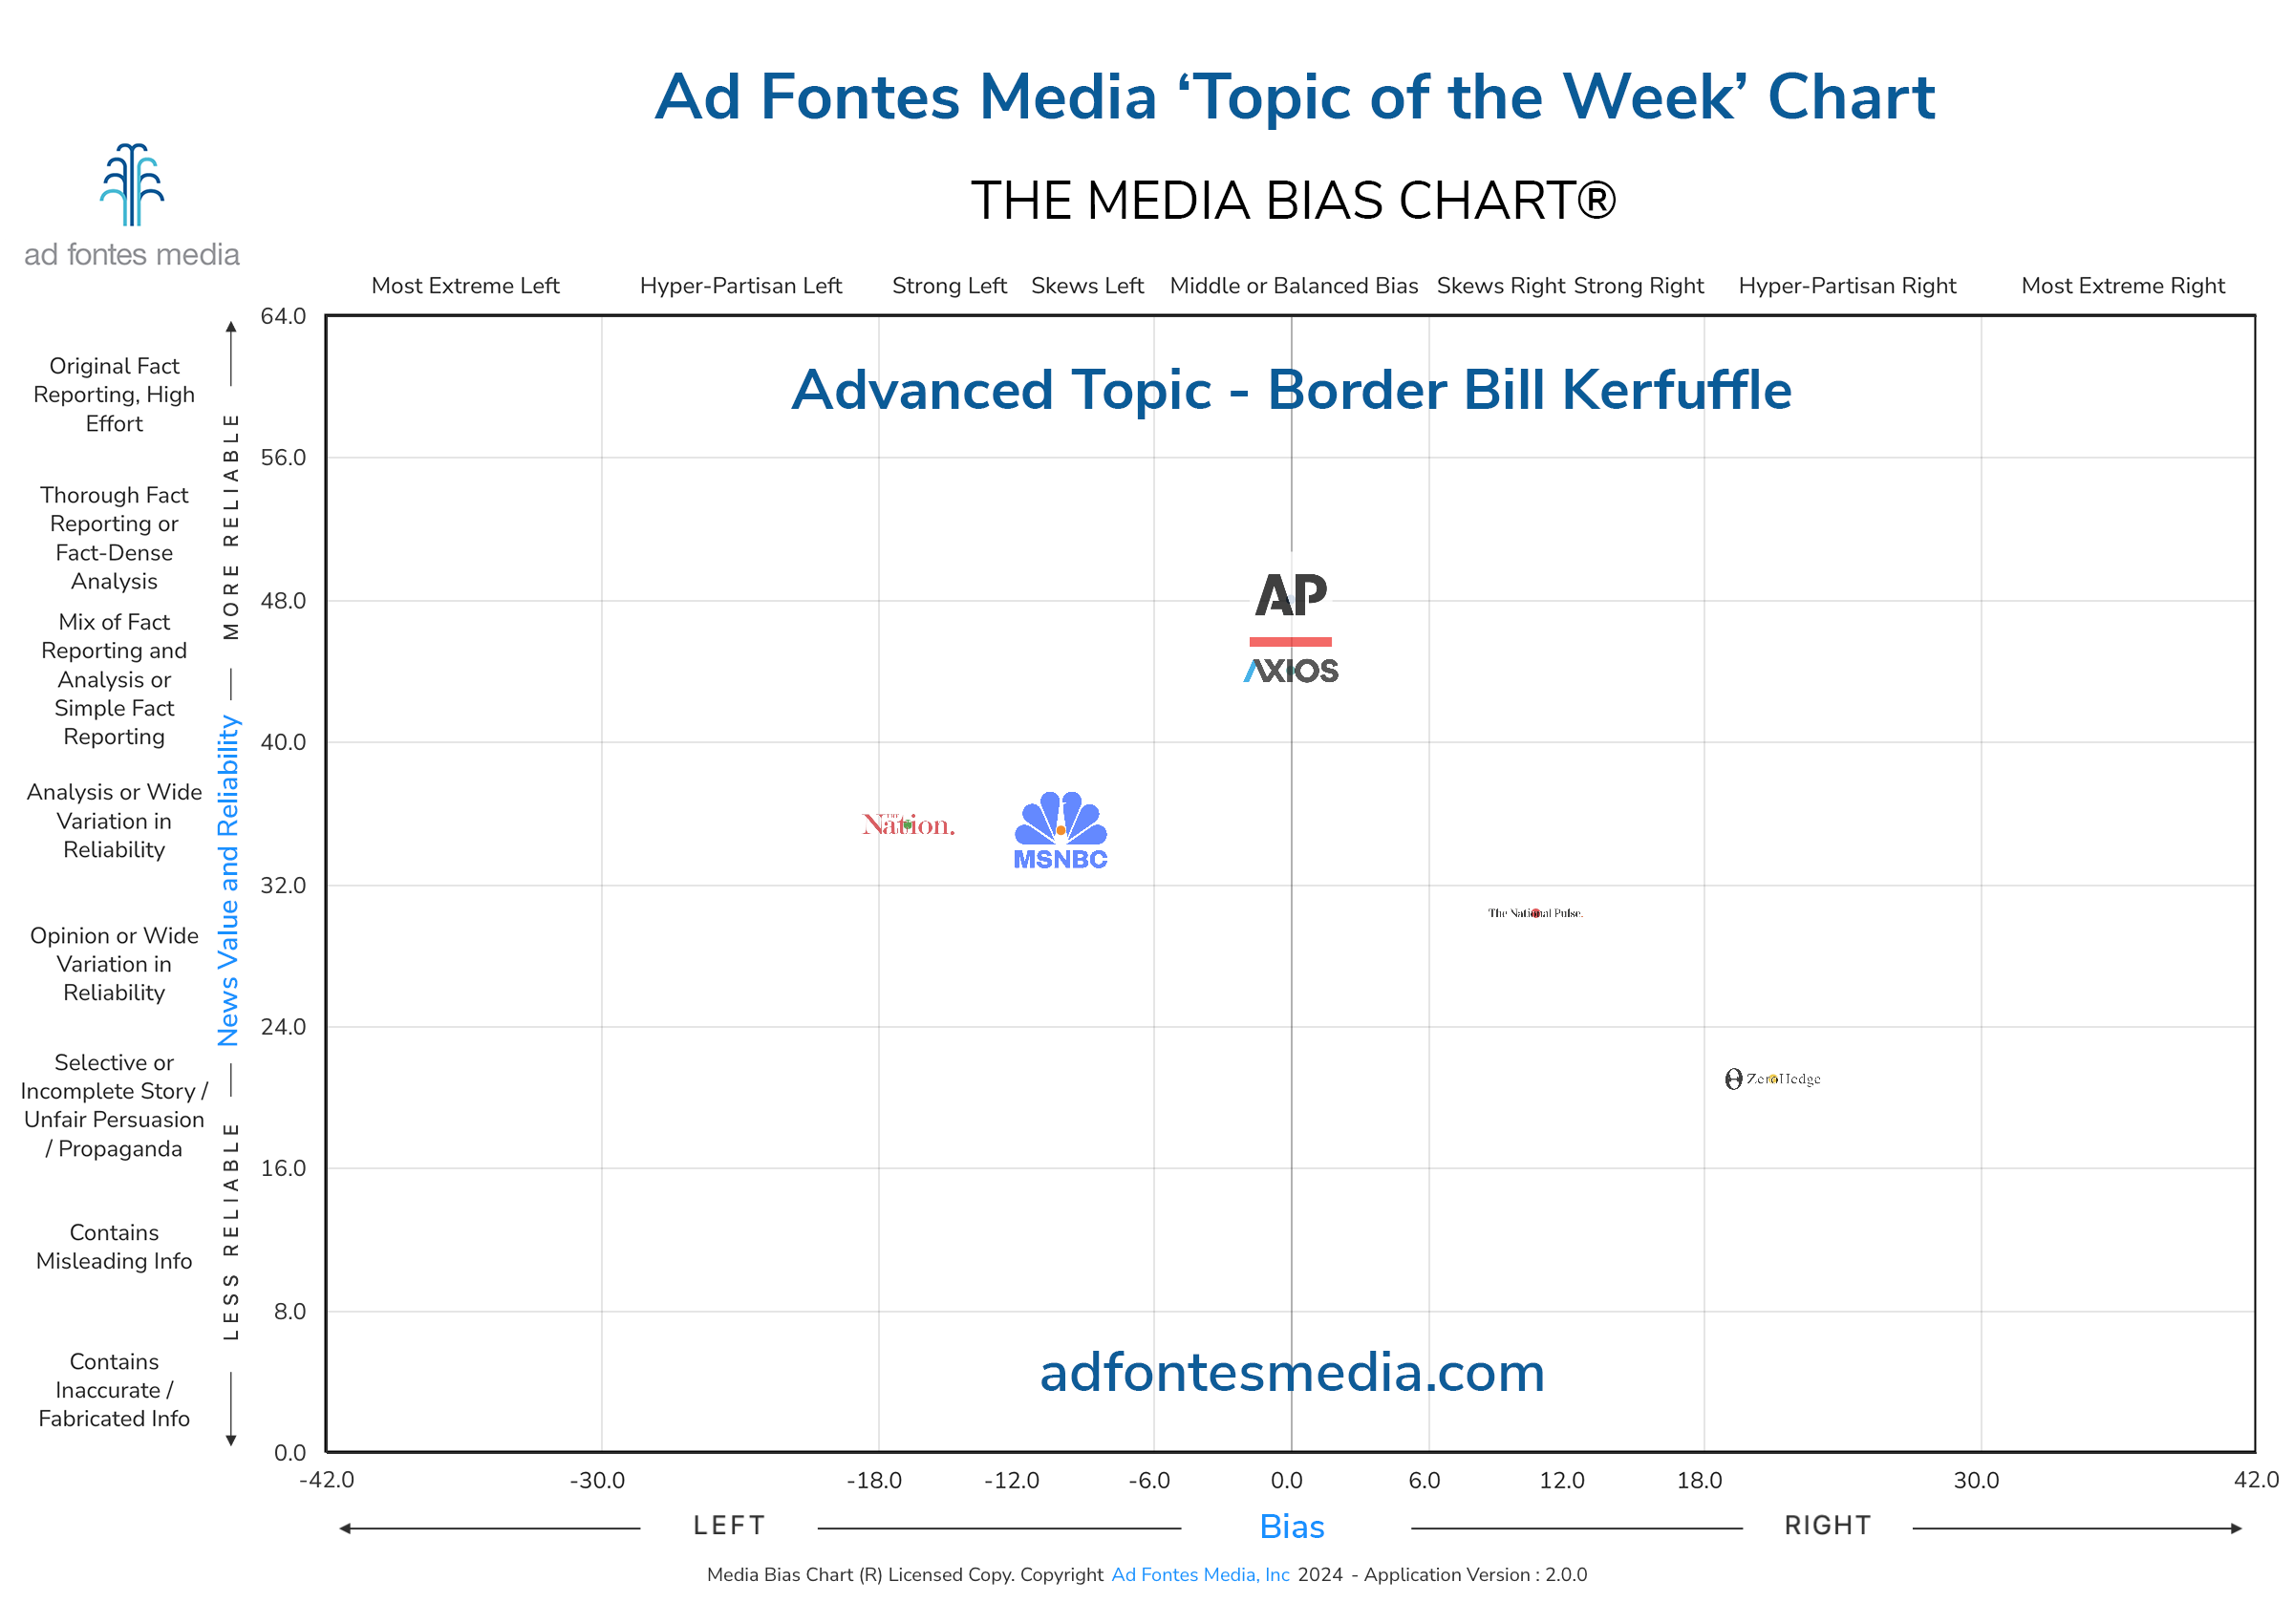 The Media Bias Chart takes a look at articles covering the failed bipartisan bill in the Topic of the Week